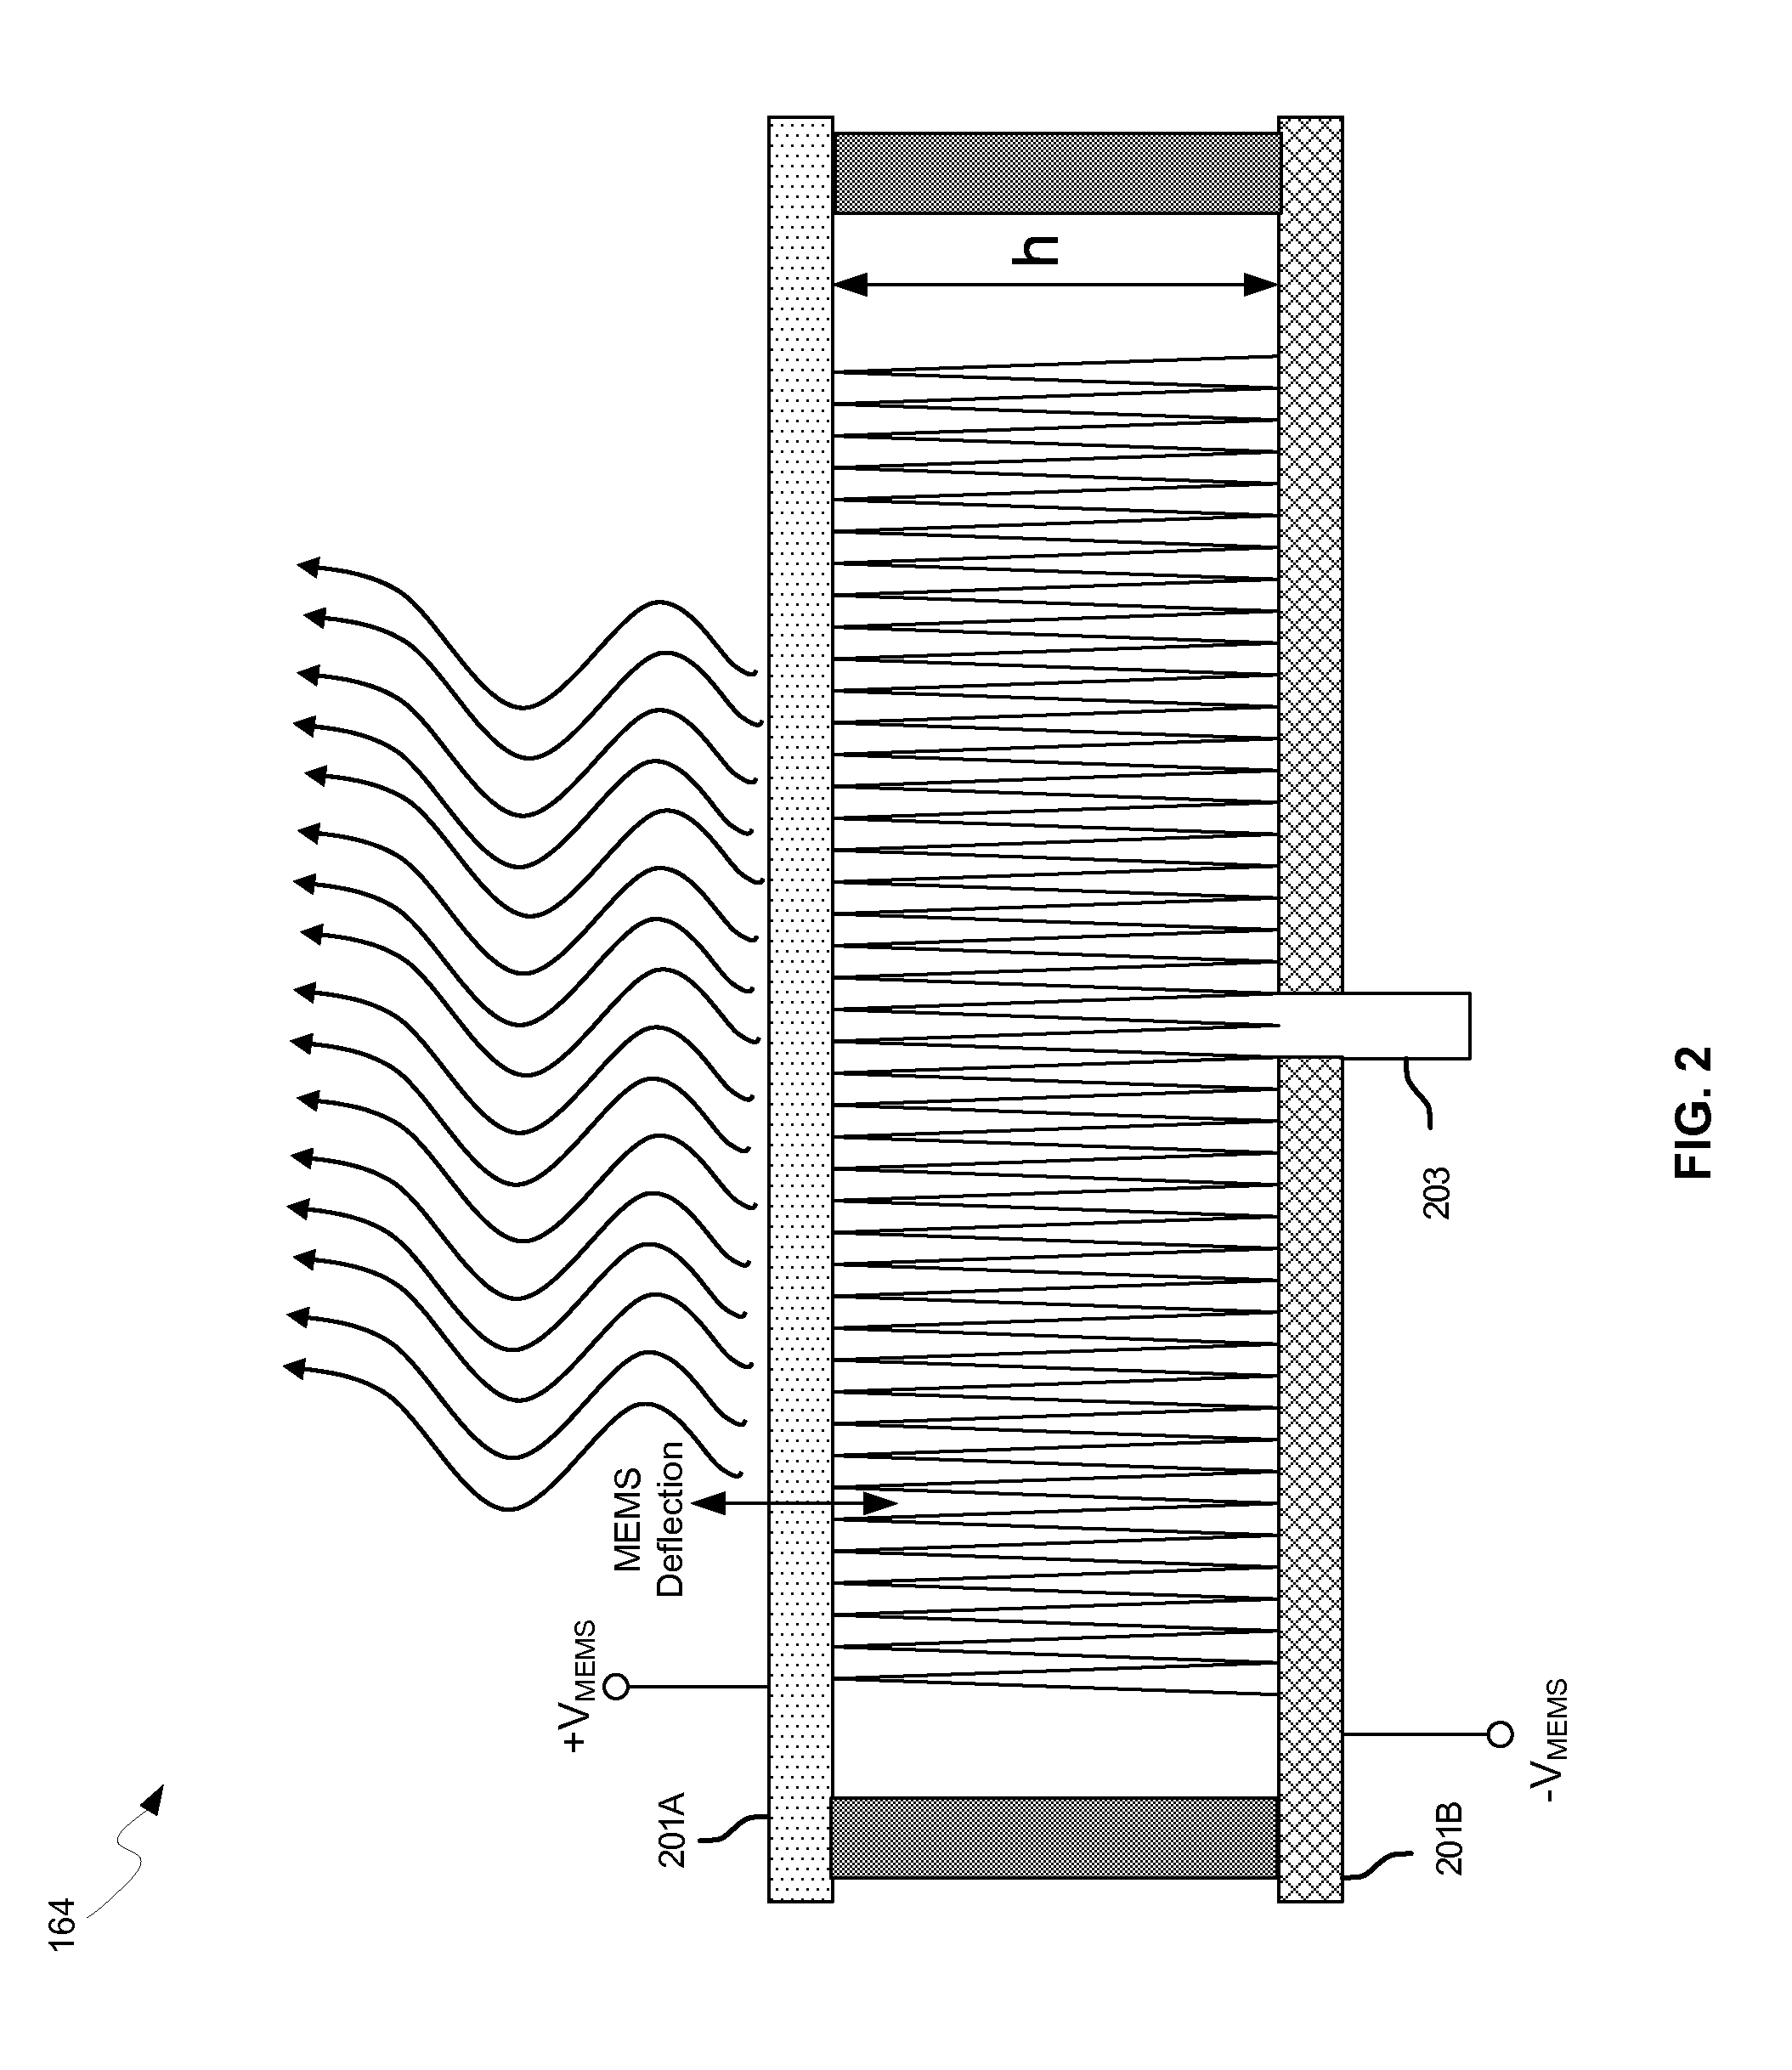 Method and system for wireless communication utilizing on-package leaky wave antennas